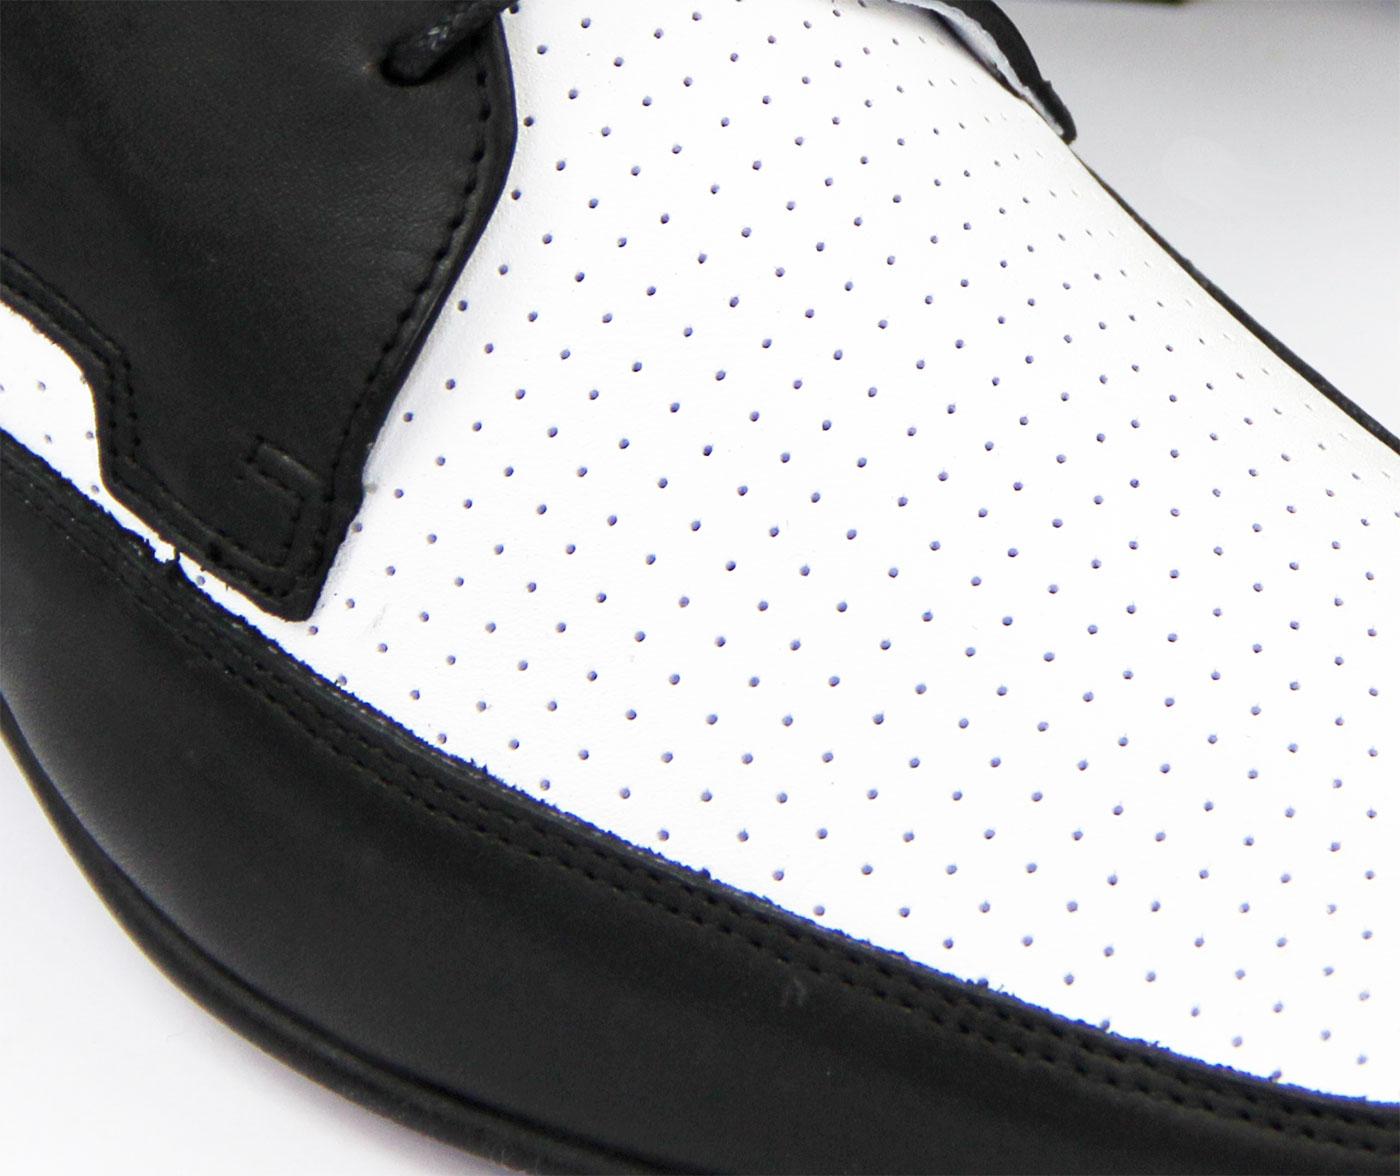 Jam Gibson Shoes | Retro Mod 2-Tone Black and White Mens Gibson Shoes